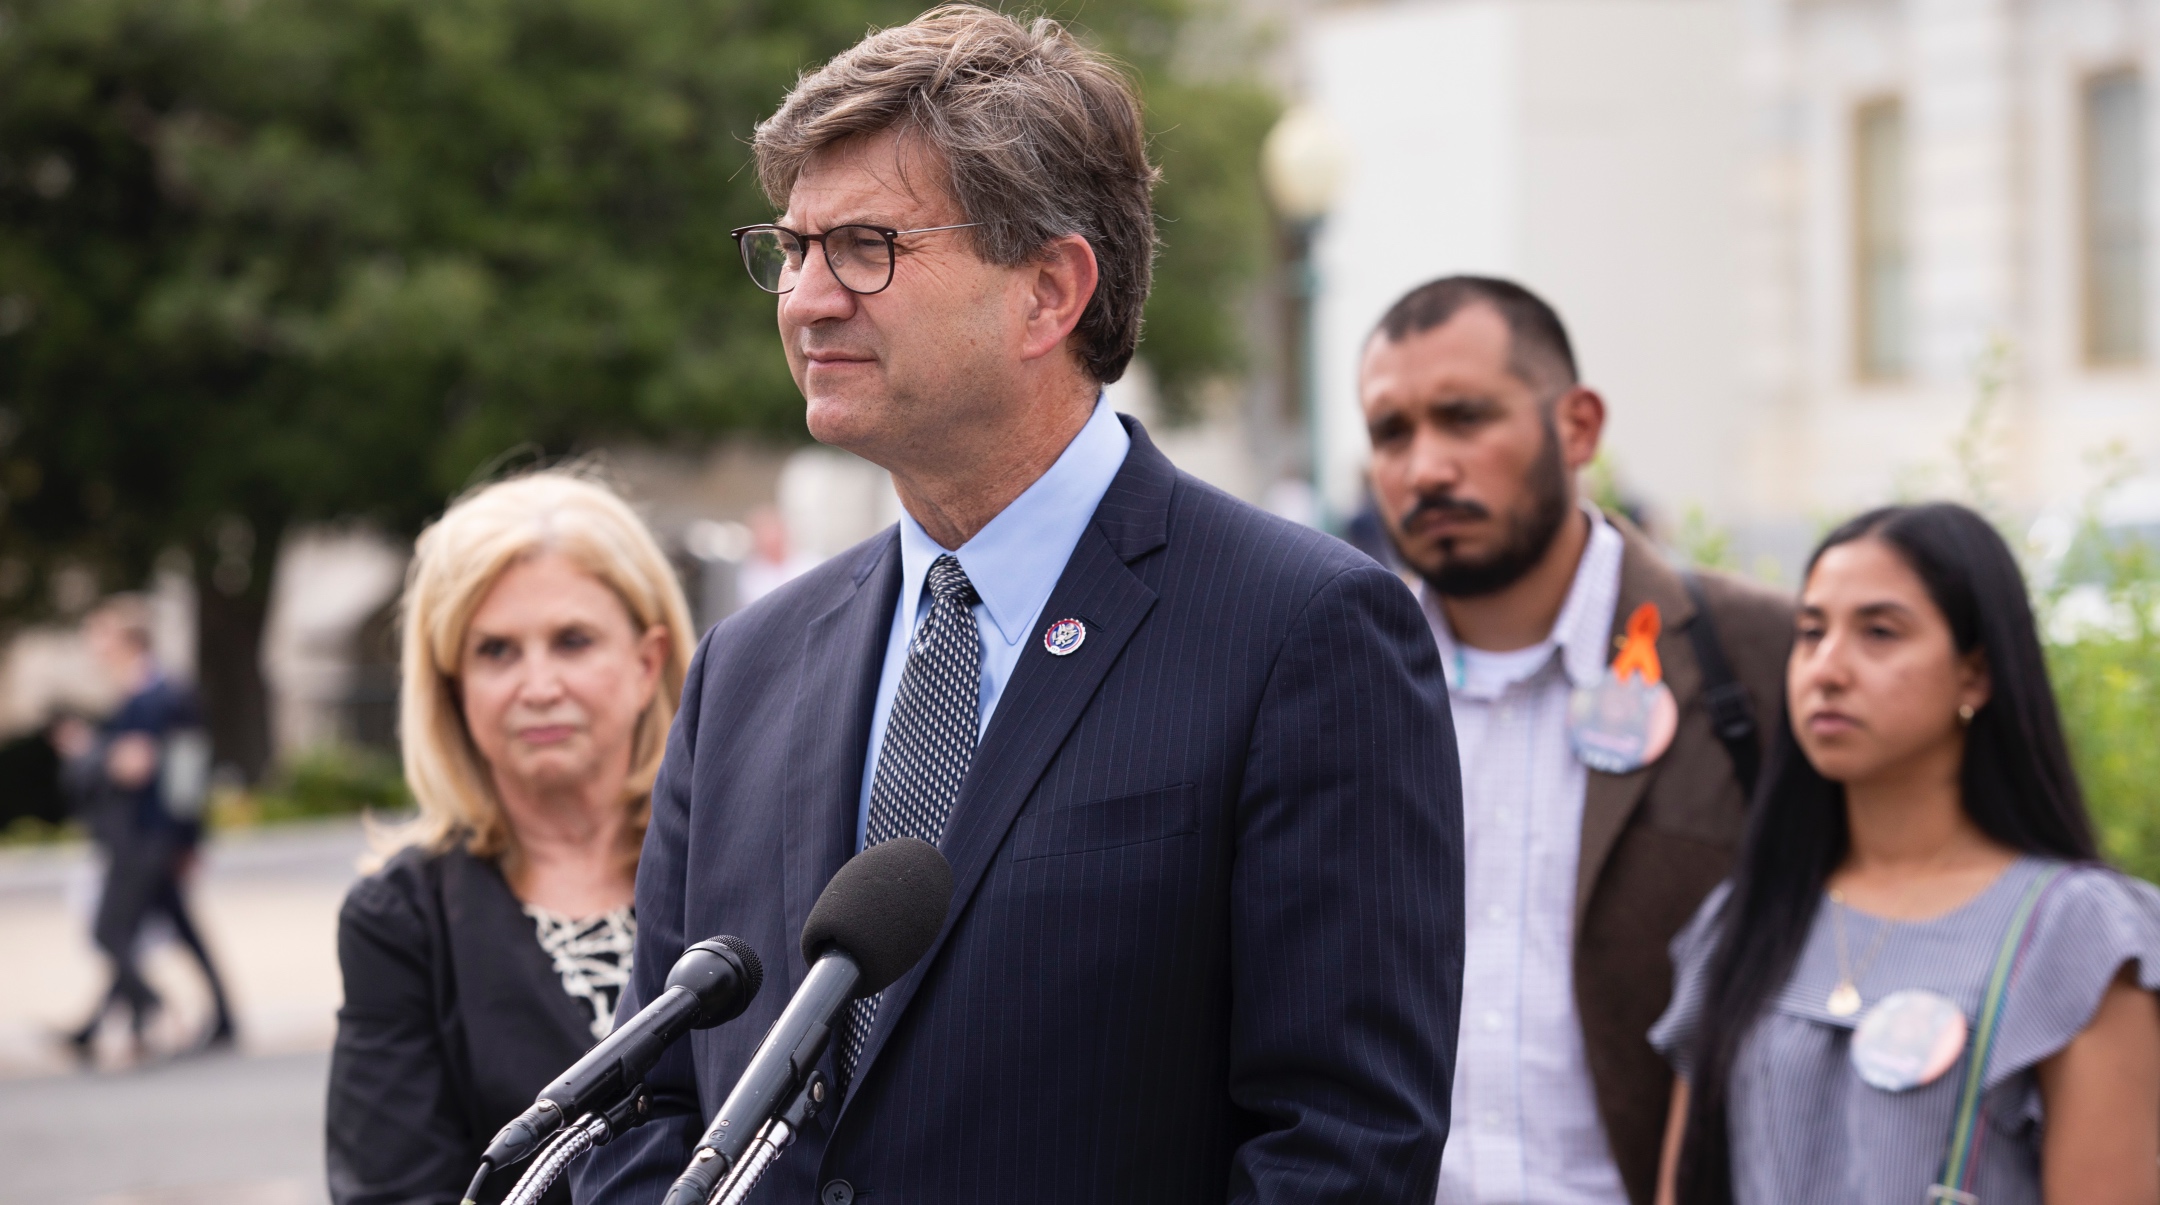 Illinois Democratic Rep. Brad Schneider speaks to reporters during a press conference in Washington, D.C., July 27, 2022. (Anna Rose Layden/Getty Images)